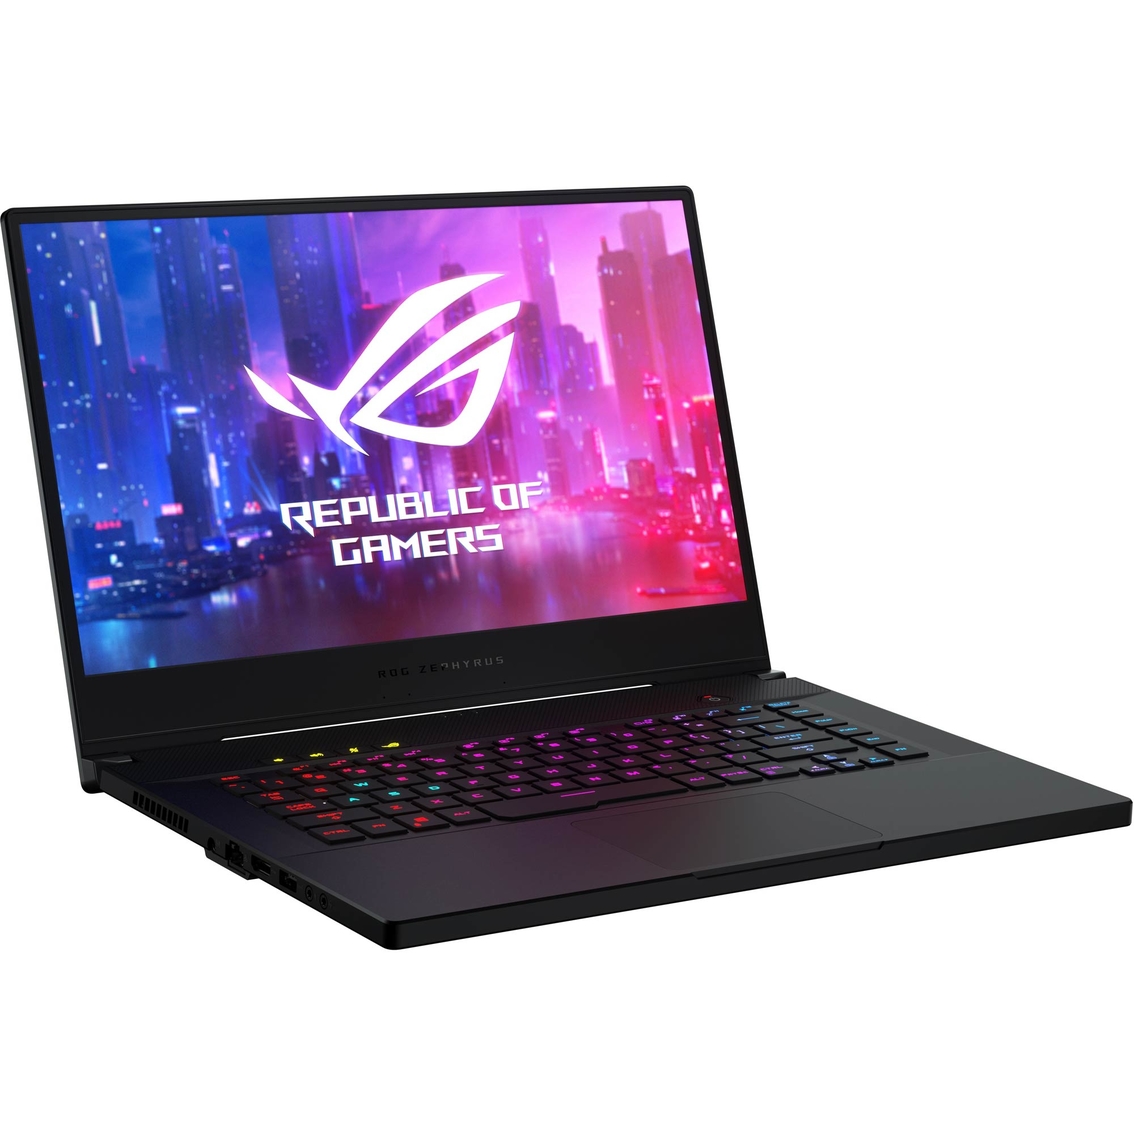 Asus ROG Zephyrus 15.6 in. Intel Core i7 2.6GHz 16GB RAM 512GB SSD Gaming Notebook